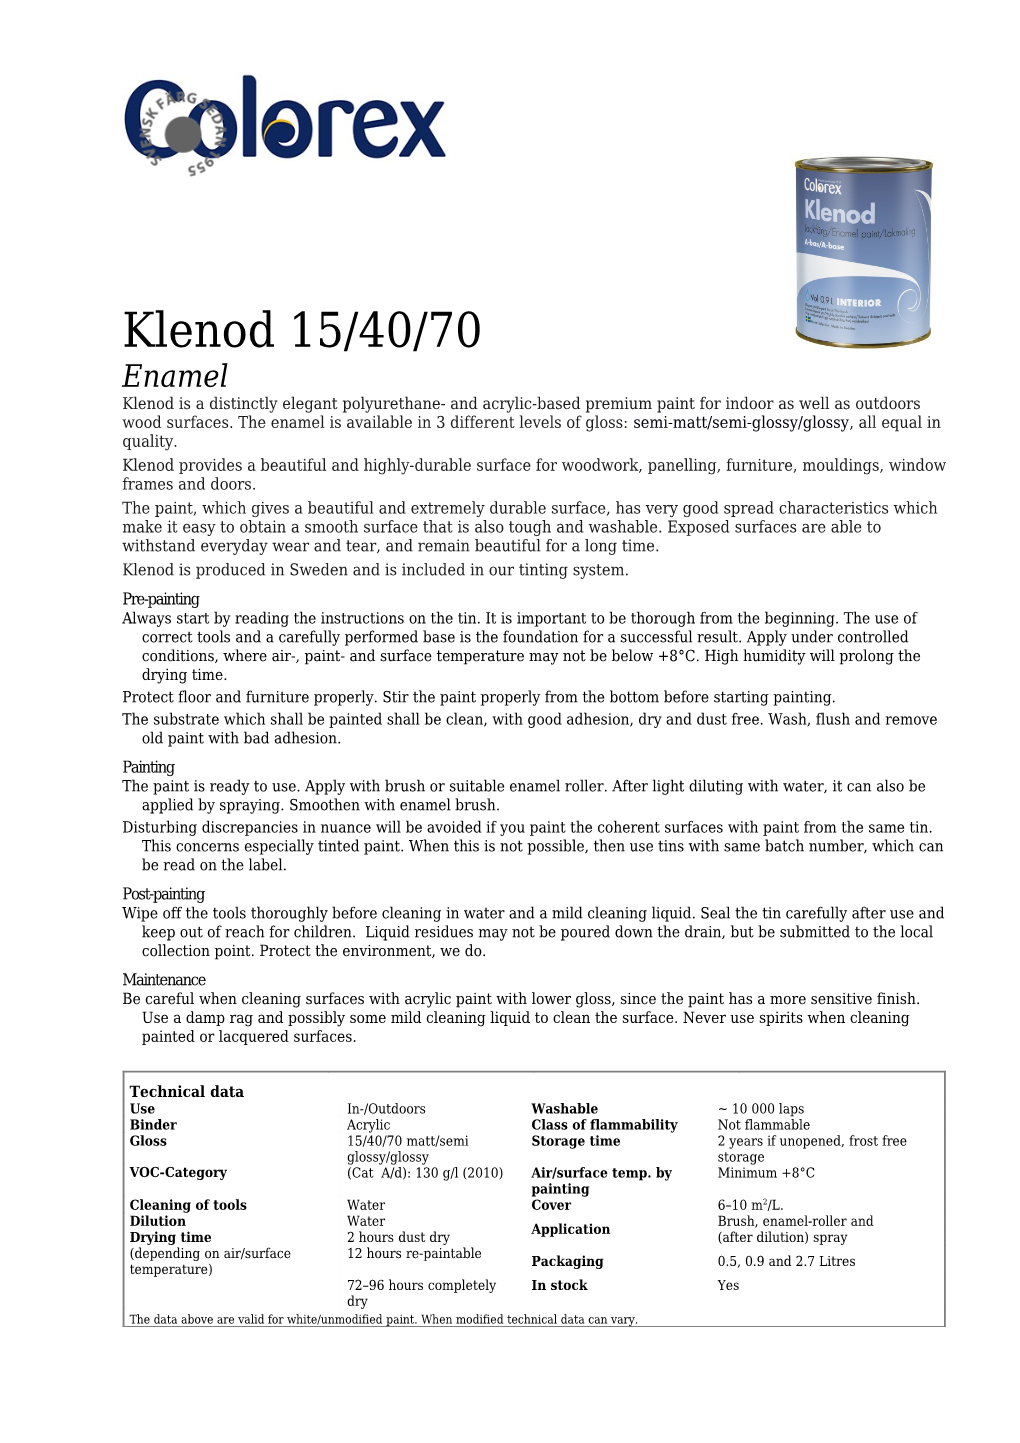 Klenodis Produced in Sweden and Is Included in Our Tinting System